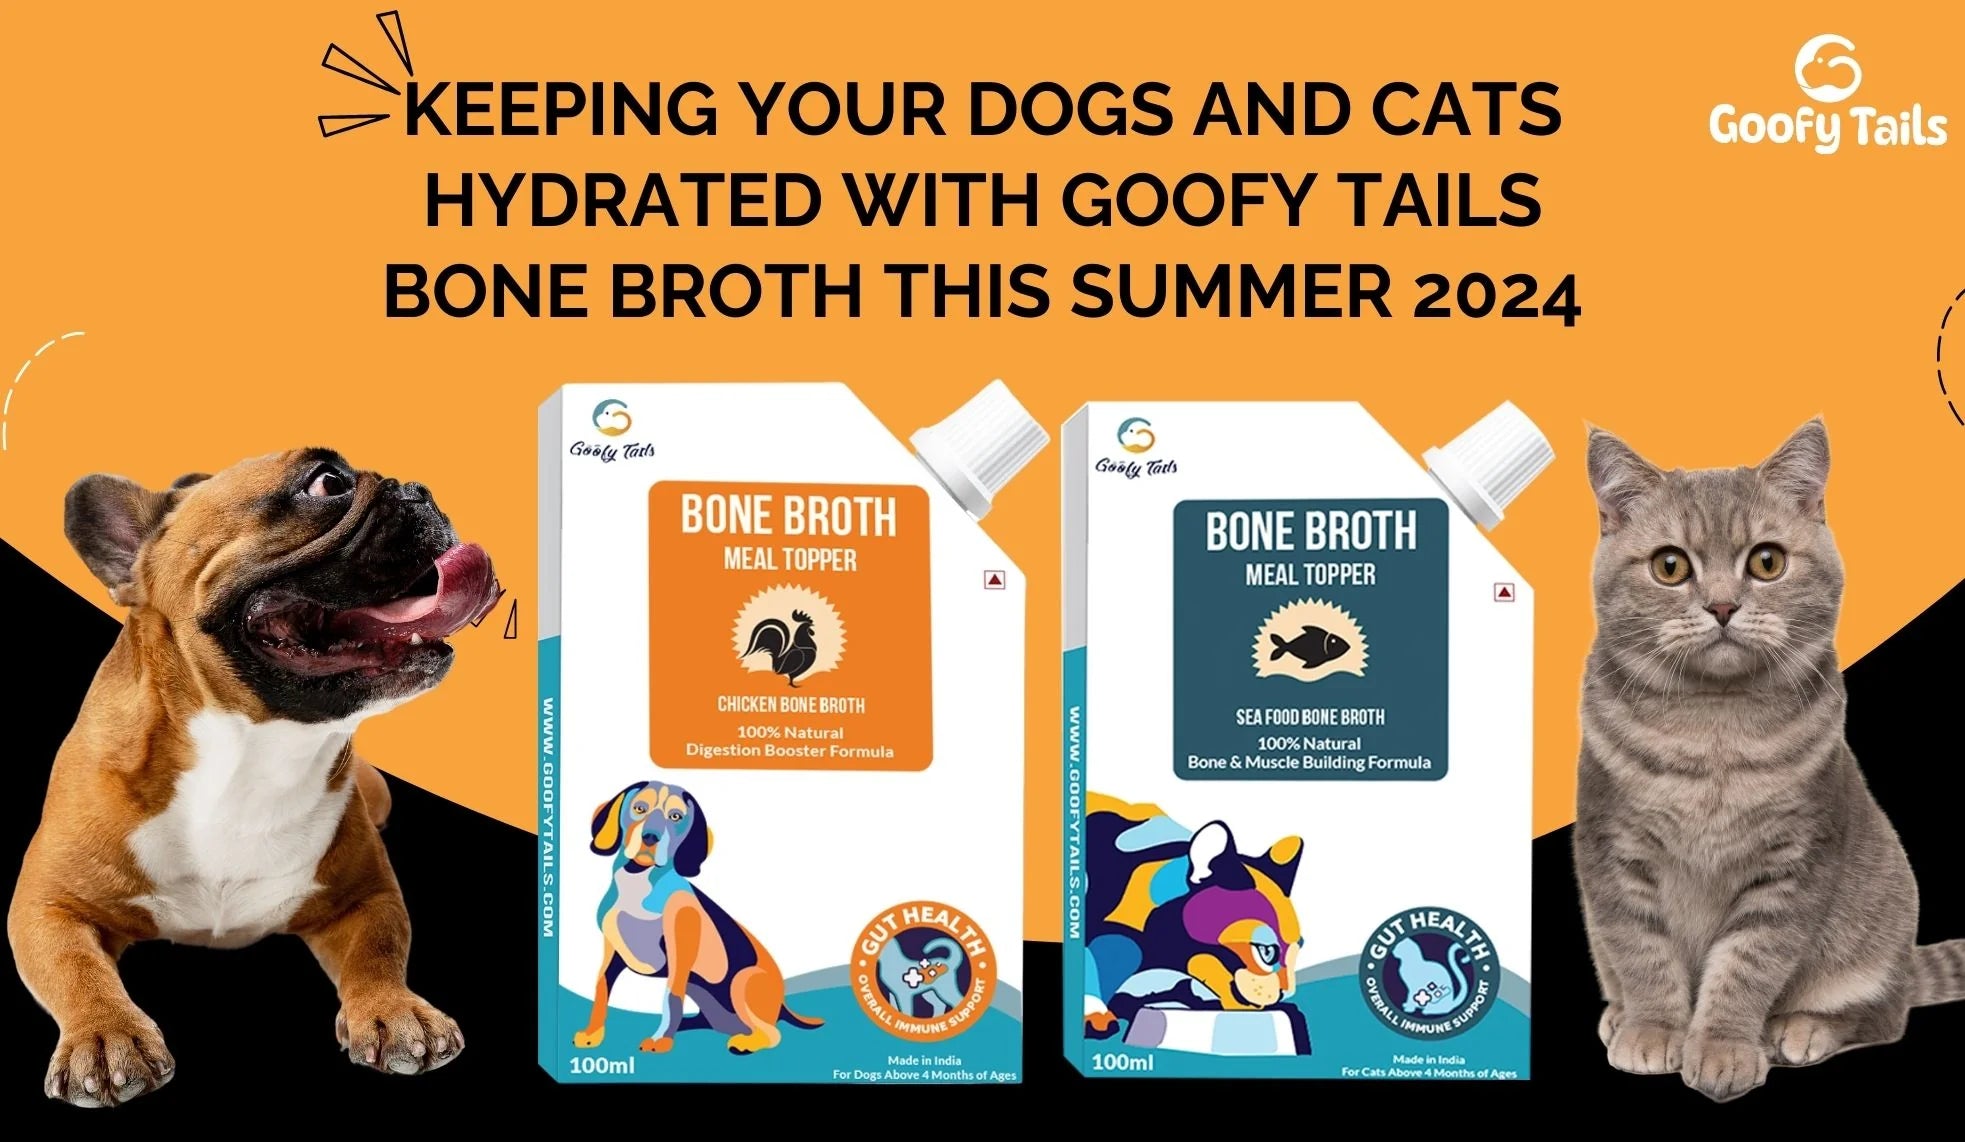 Keeping Your Dogs and Cats Hydrated with Goofy Tails Bone Broth This Summer 2024